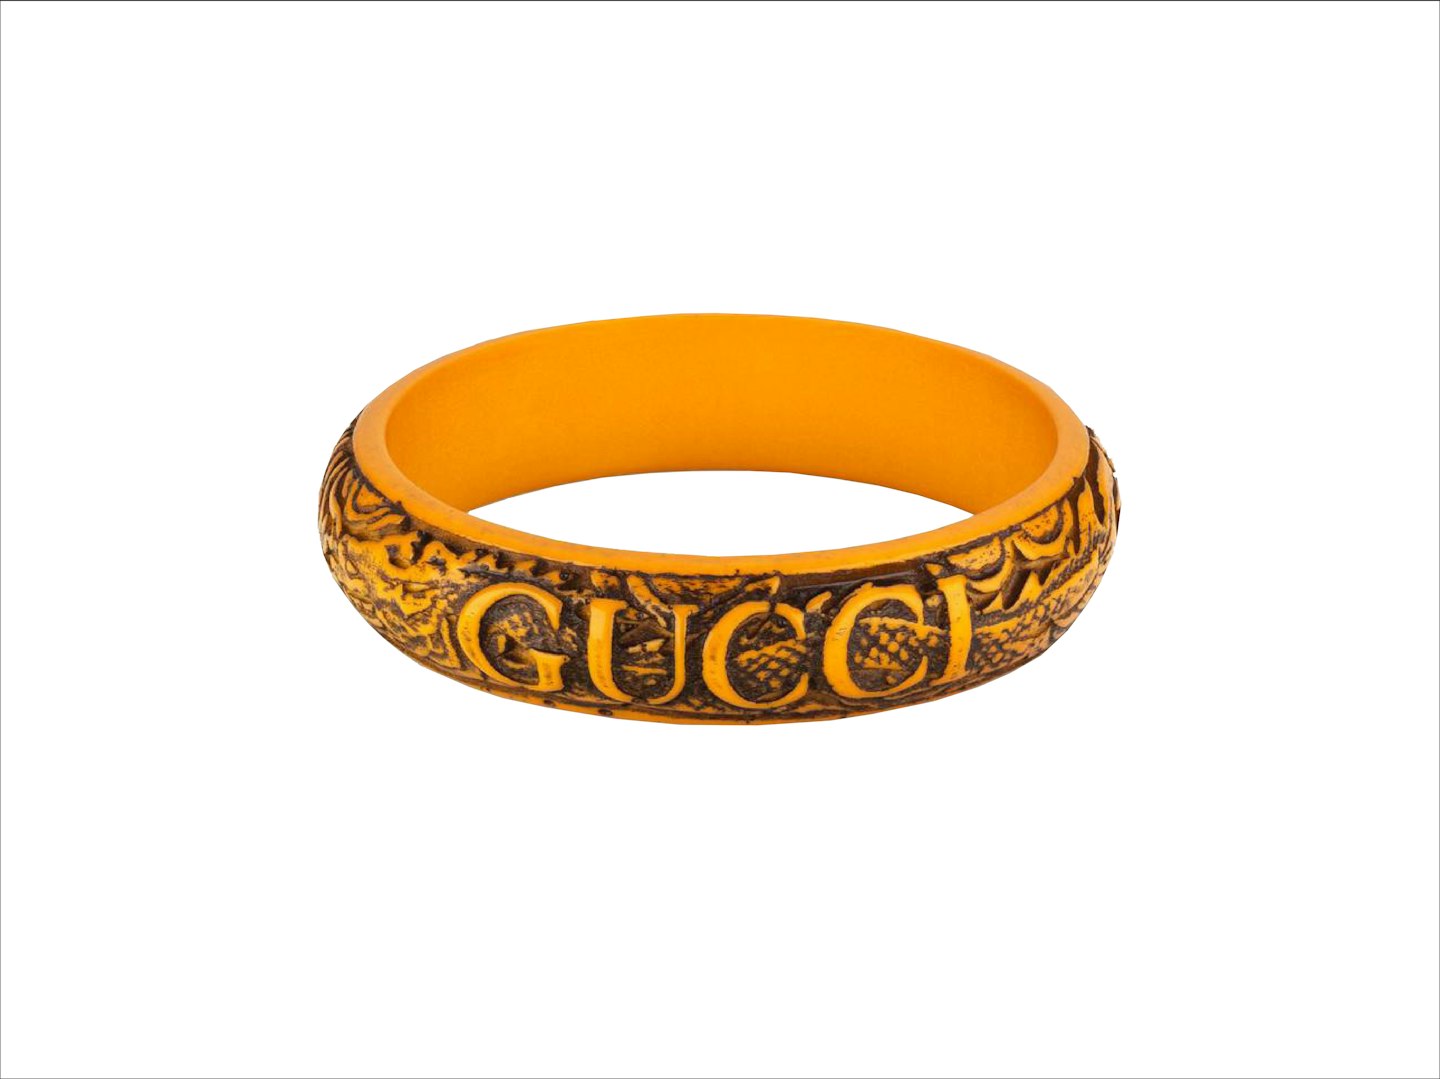 Gucci Bracelet With Engraved Leaves from Gucci